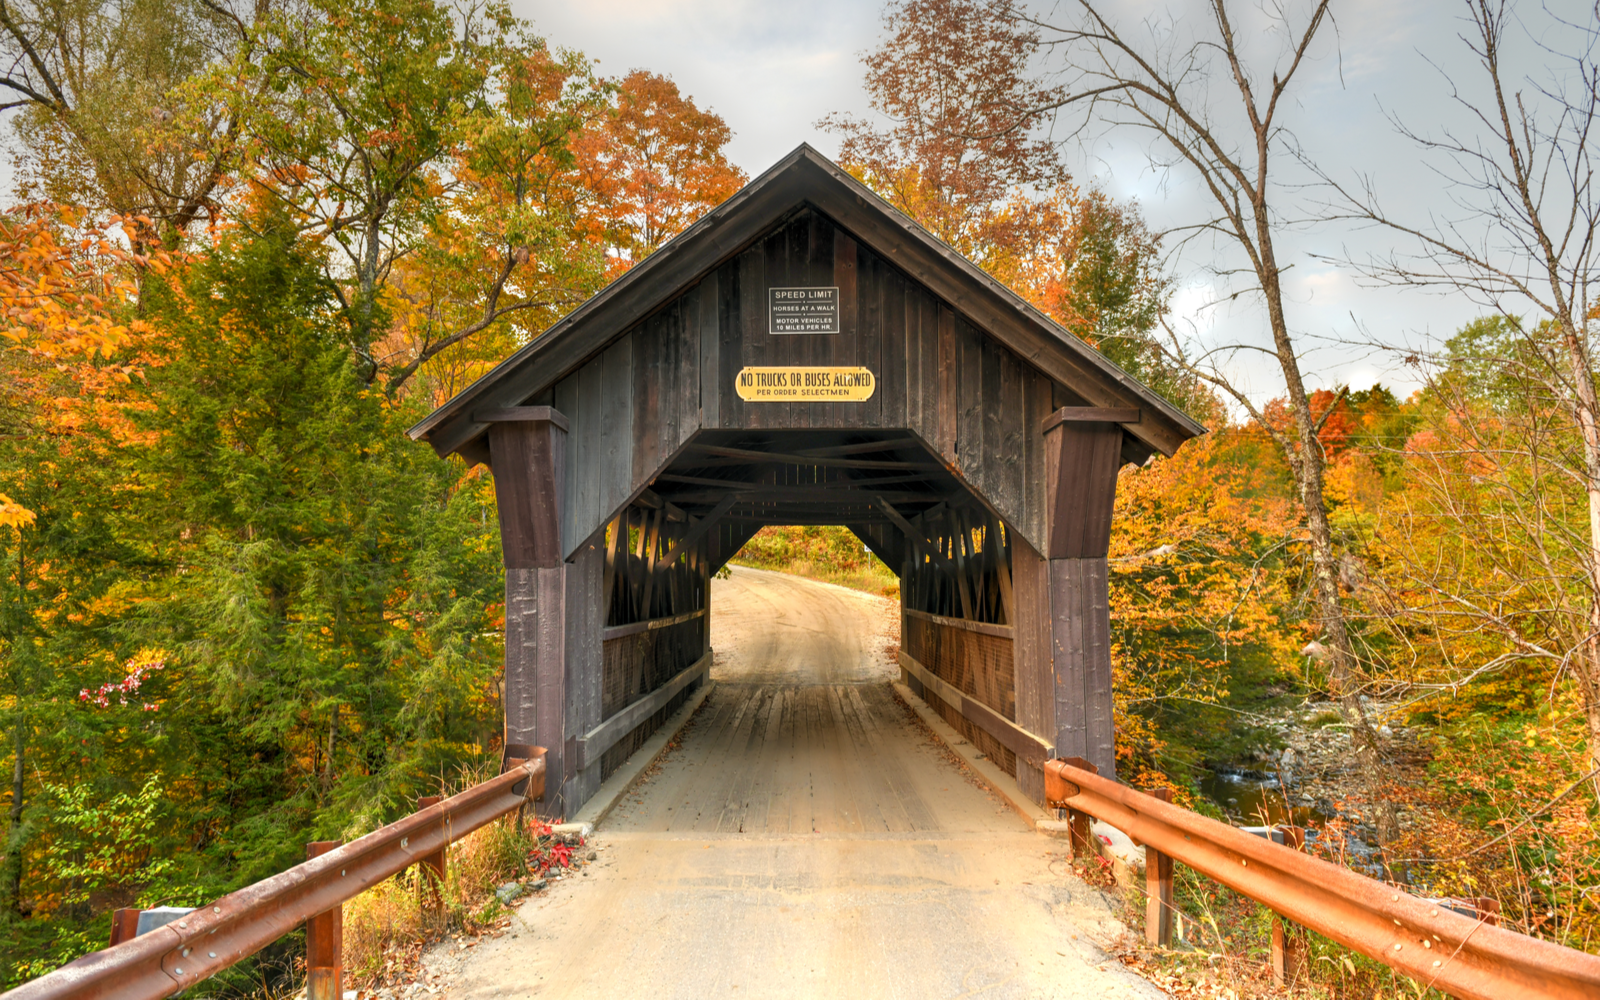 Cool rural covered bridge in Stowe, one of the best places to visit in Vermont